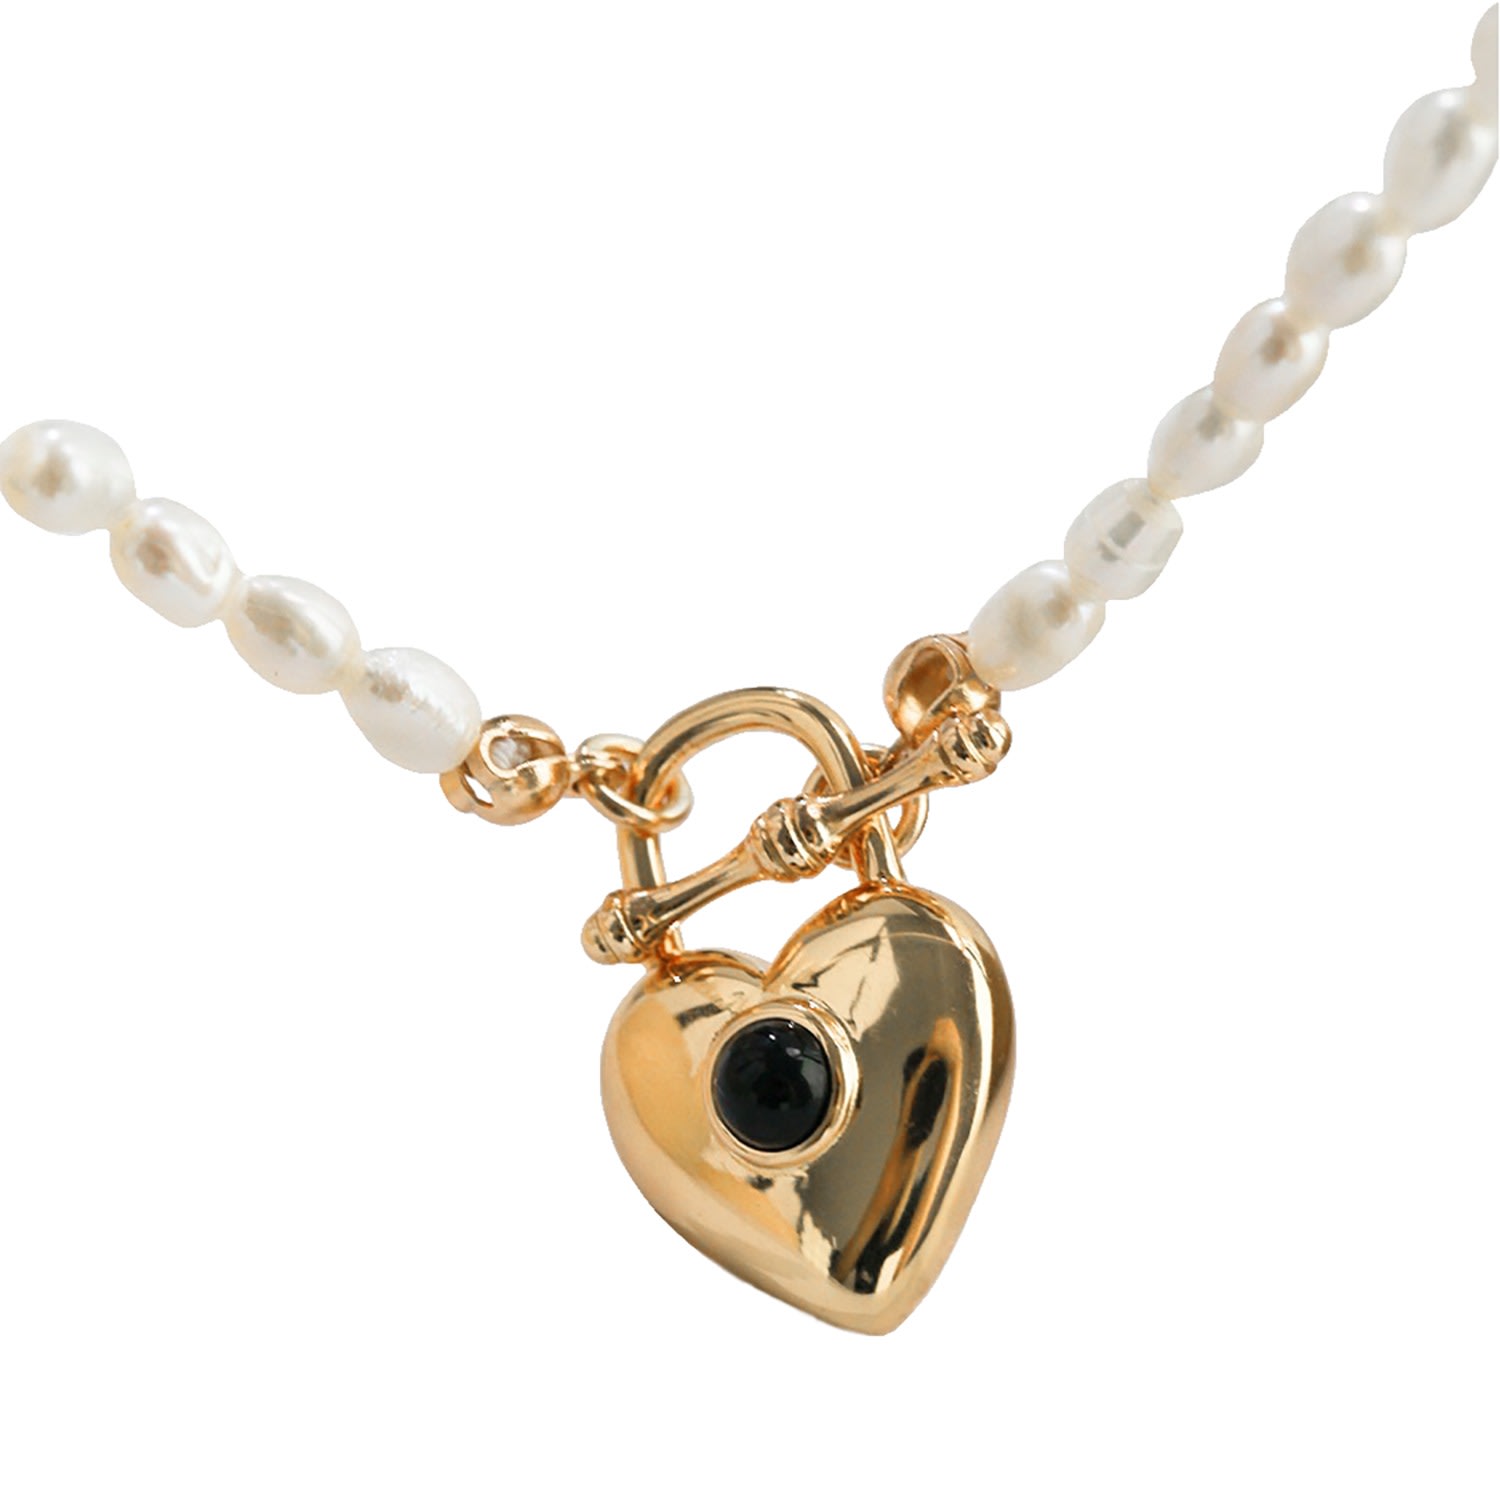 Women’s White Heart Shaped Lock Pendant Freshwater Pearls Necklace Ms. Donna